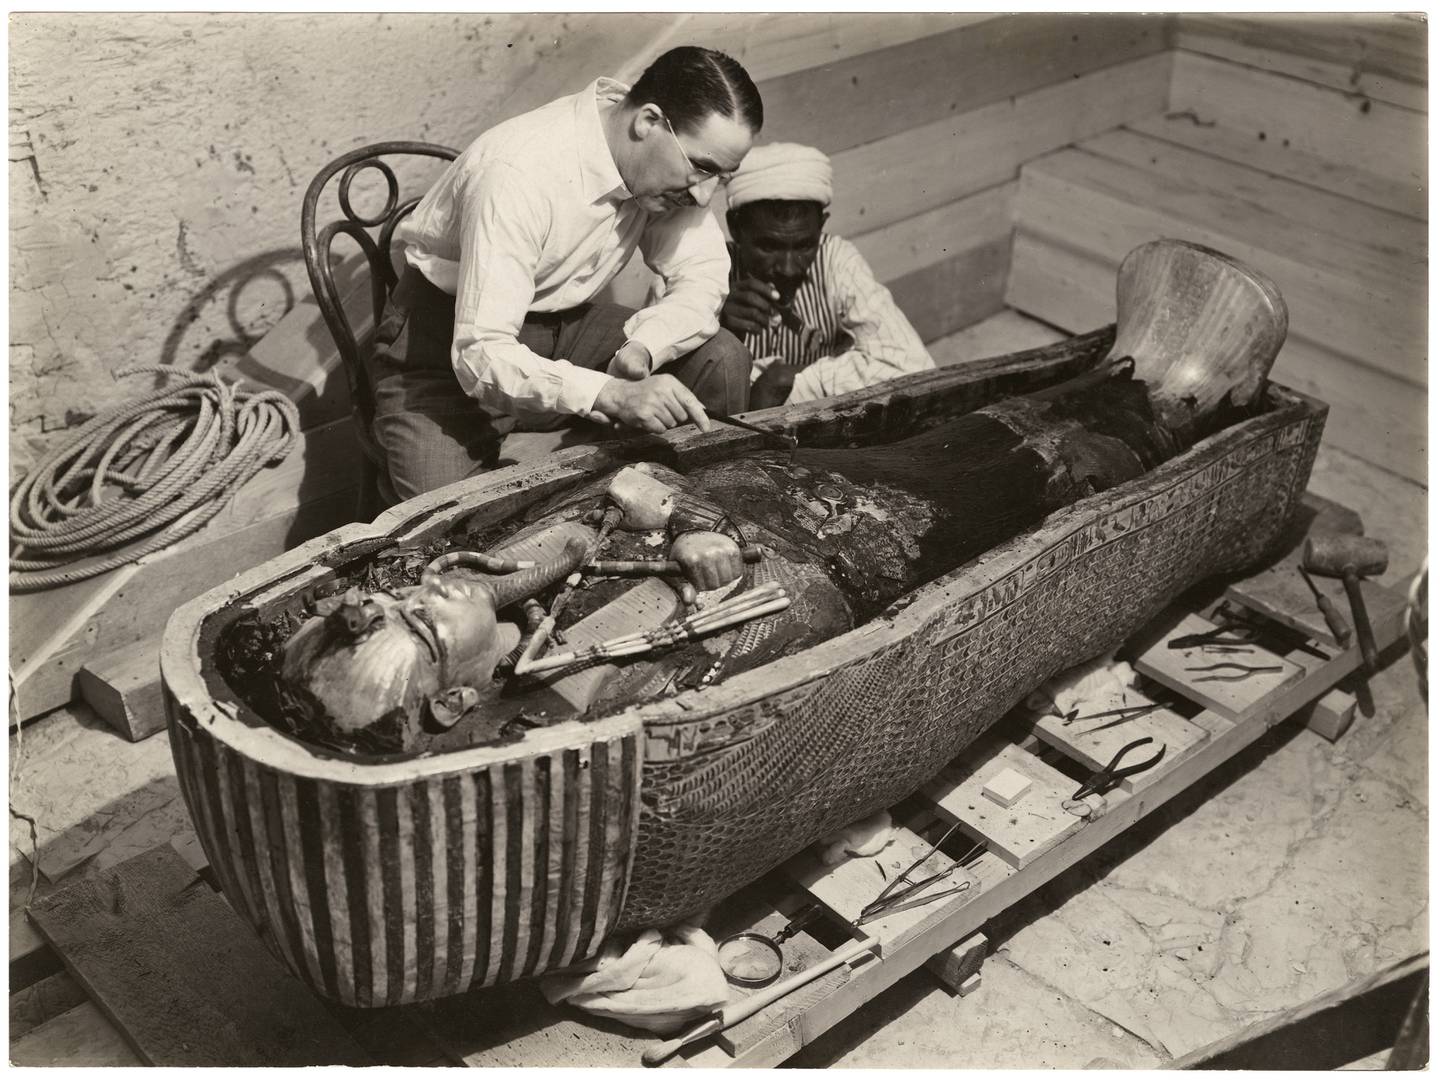 British archaeologist Howard Carter and an Egyptian worker examining the inner coffin of ancient Egyptian King Tutankhamun. Photo: The Bodleian Libraries, University of Oxford